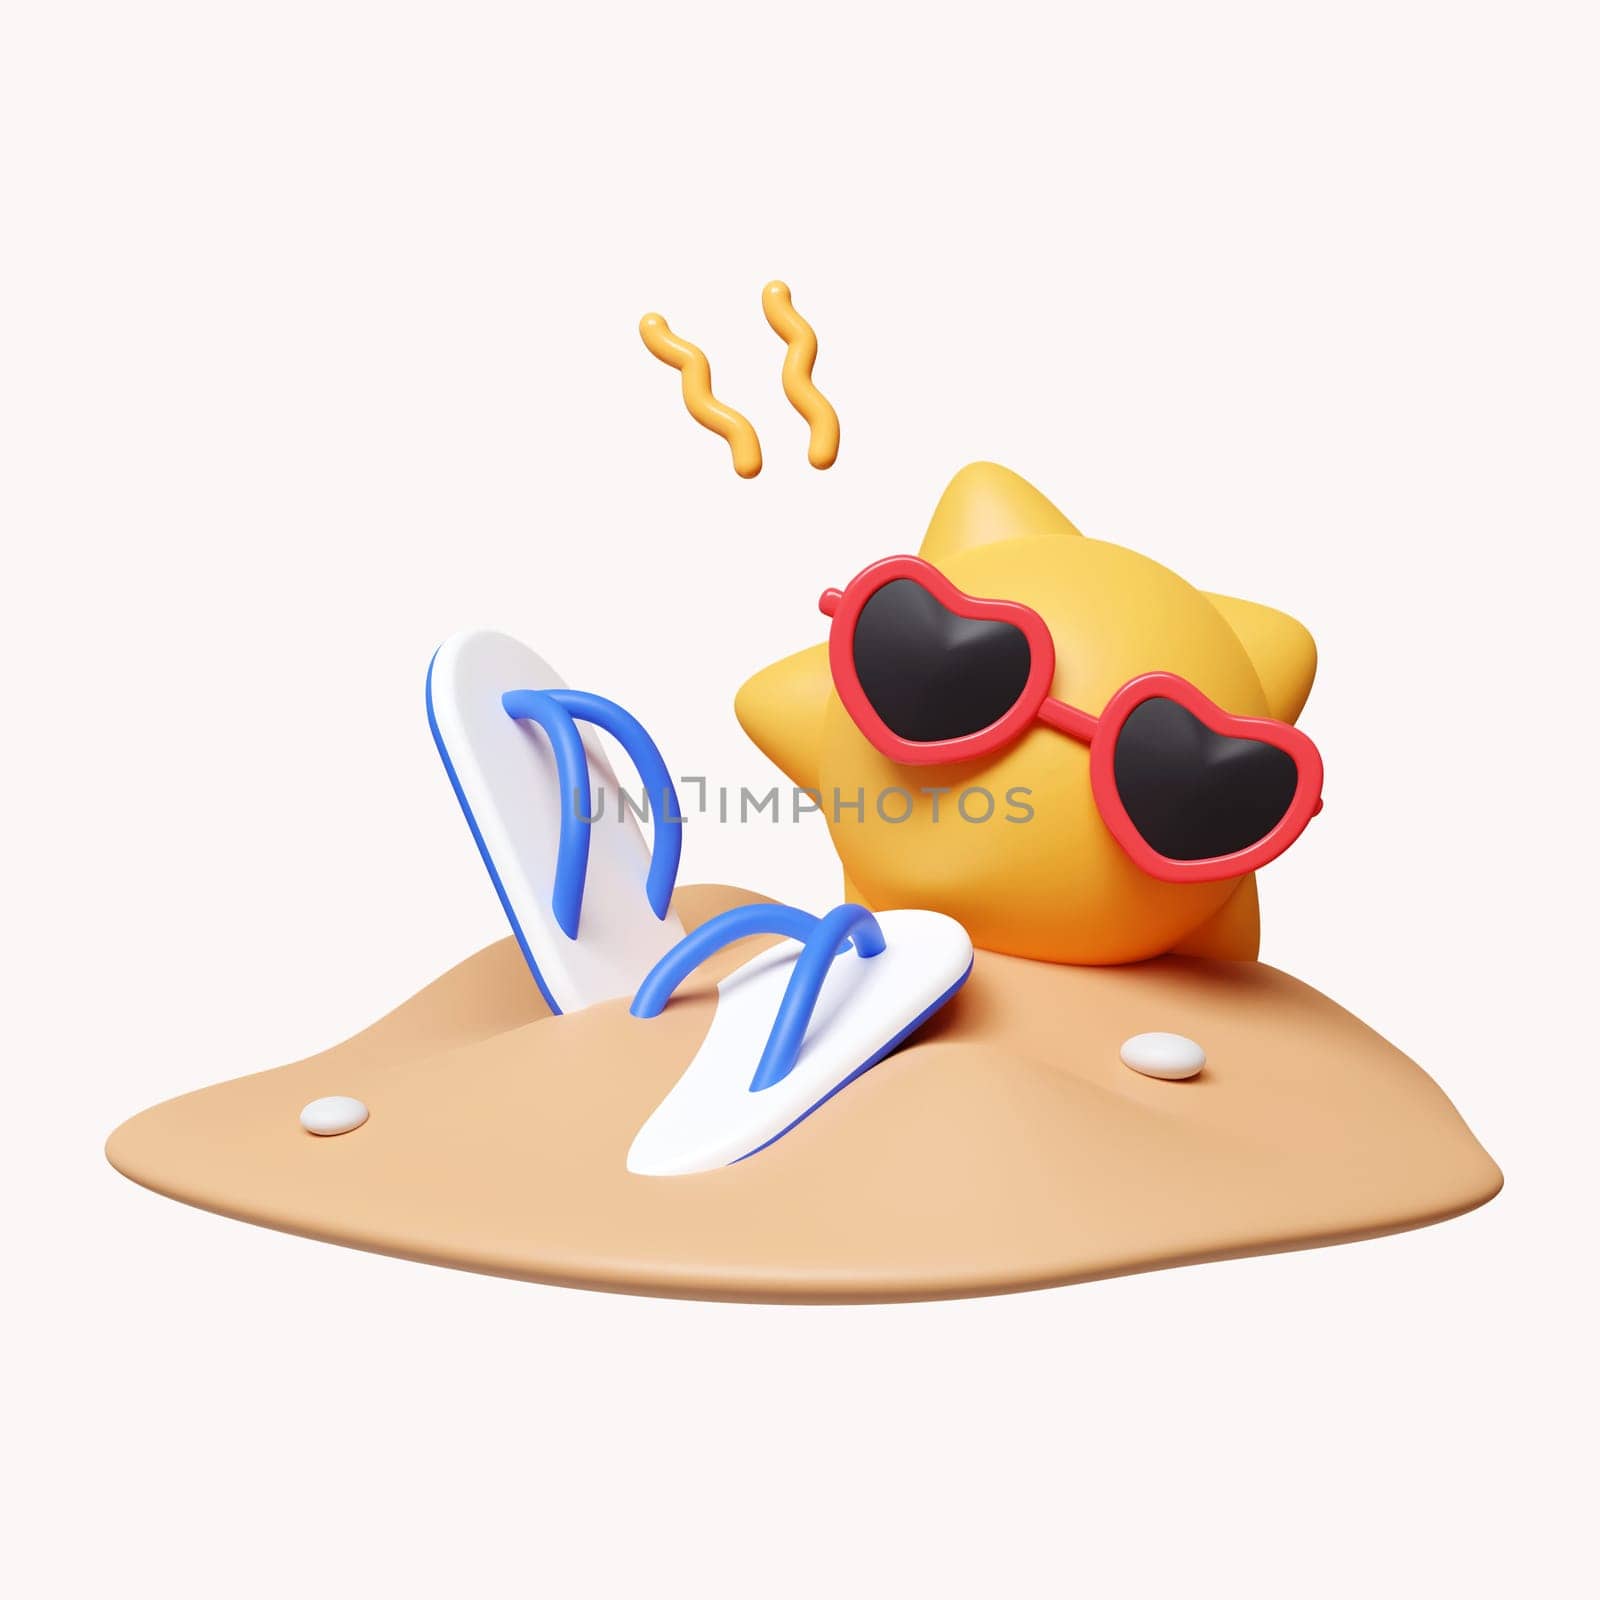 3d sun wearing sunglasses on sand with sandals. summer vacation and holidays concept. icon isolated on white background. 3d rendering illustration. Clipping path. by meepiangraphic